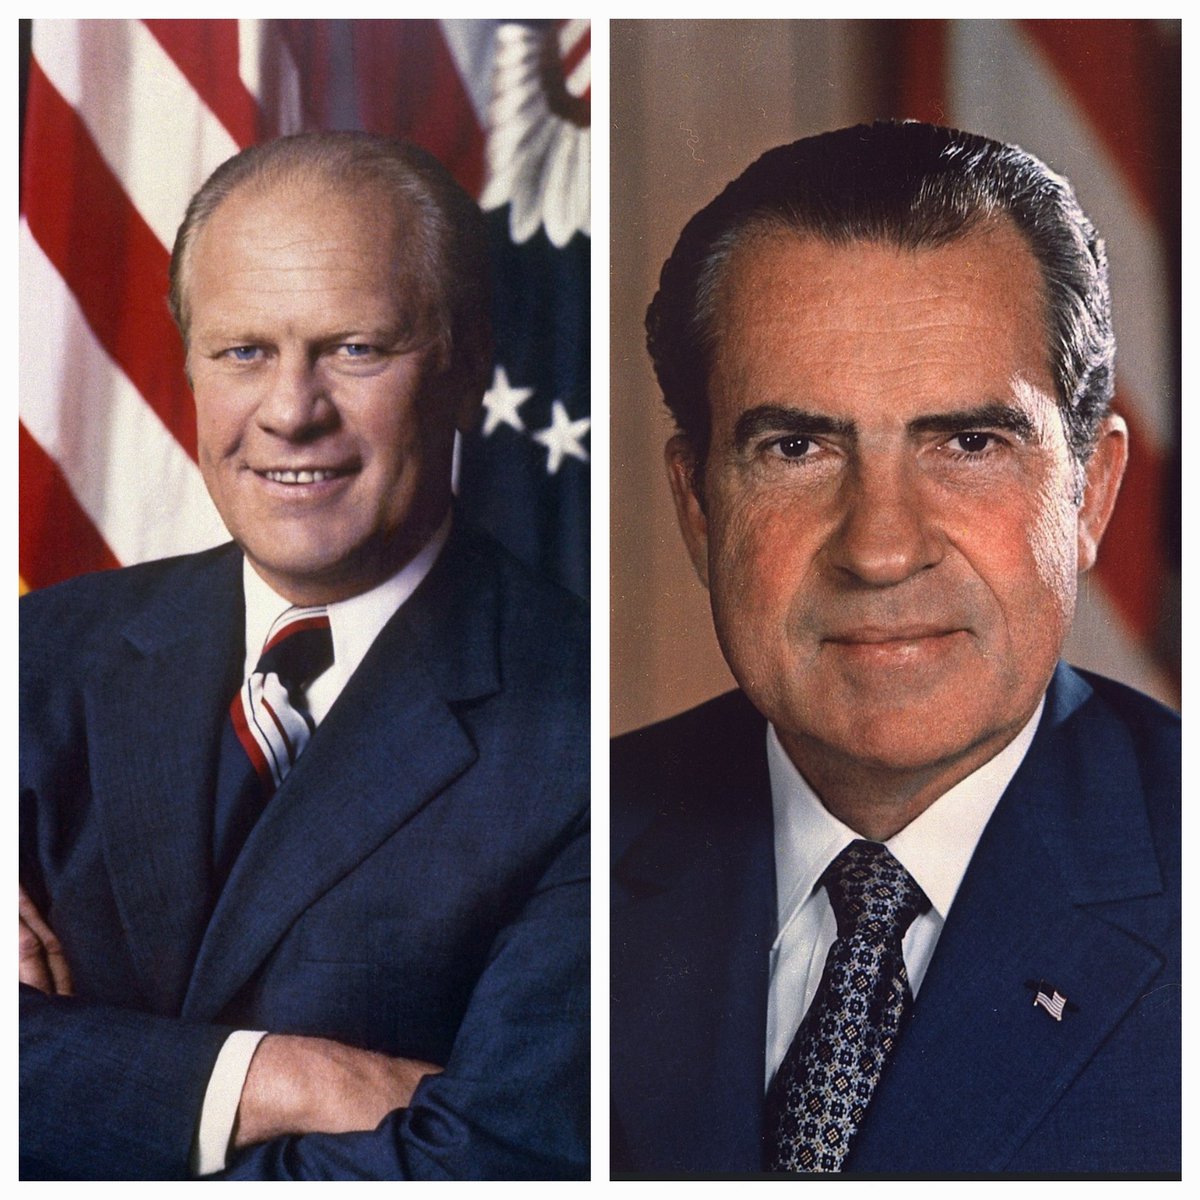 Did Gerald Ford make a mistake by pardoning Richard Nixon? What do YOU think?

YES or NO